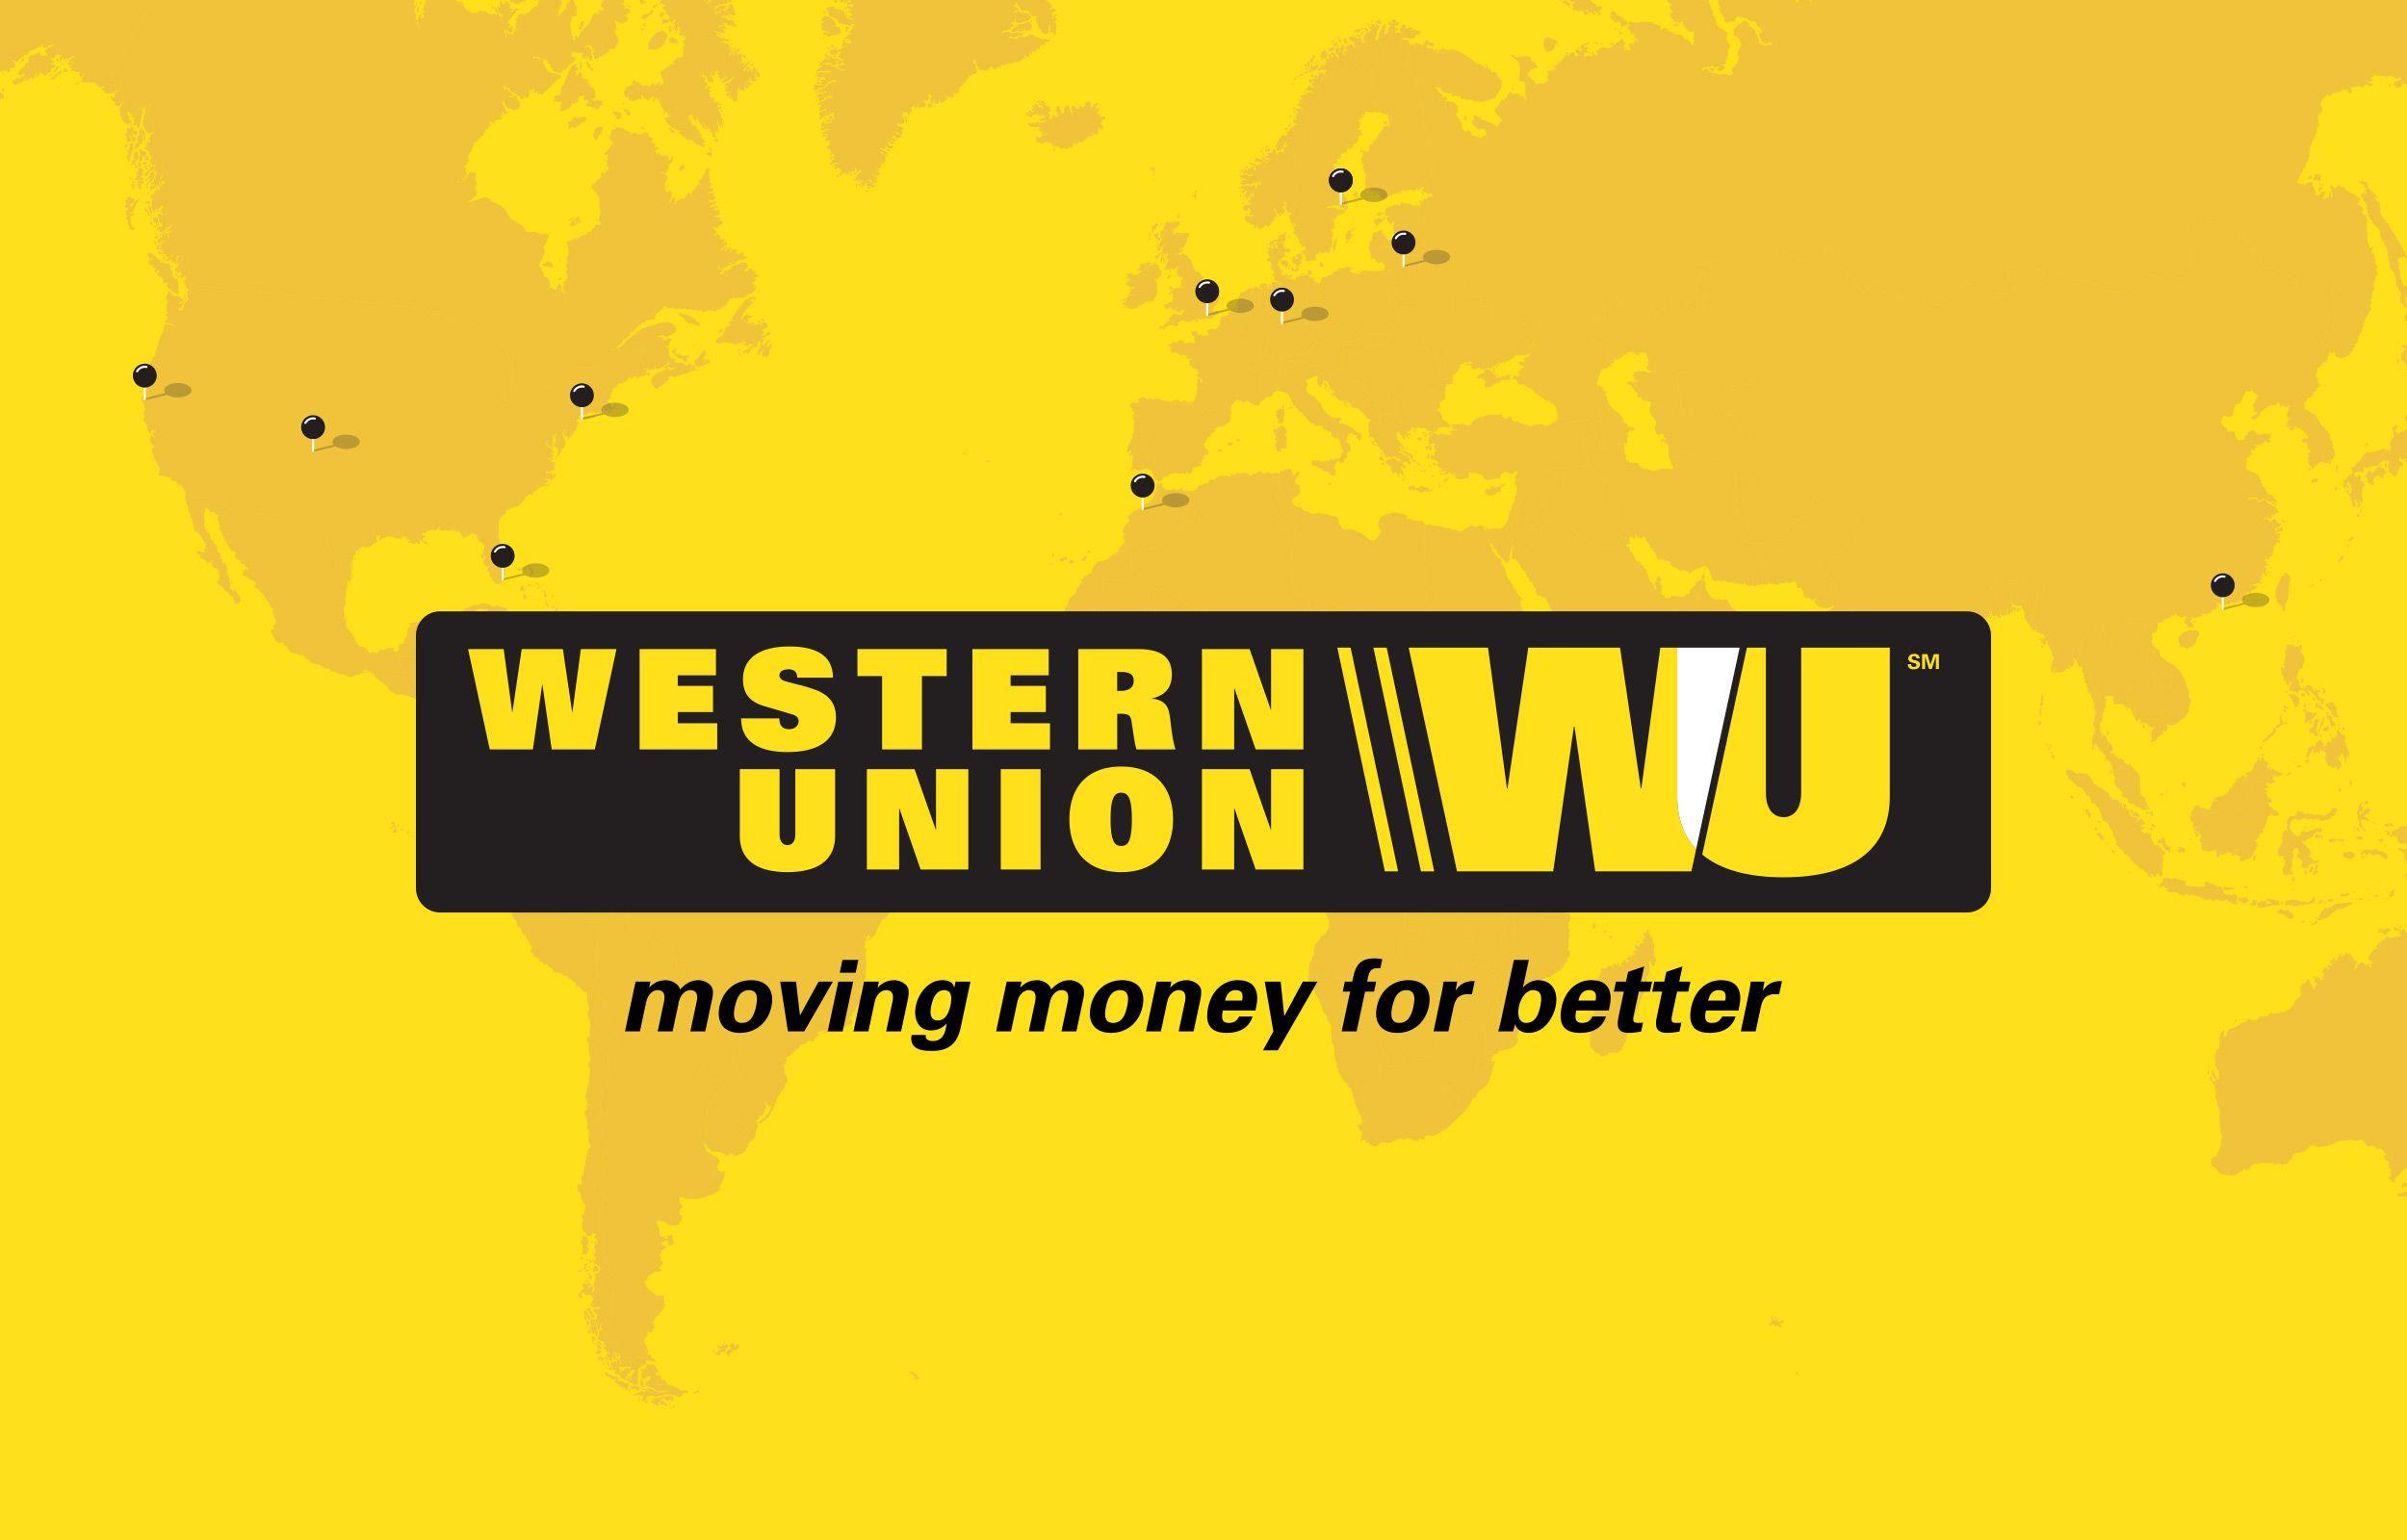 Western Union New Logo - Brand New Cars Up For Grabs In Western Union Mega Promo - PER SECOND ...